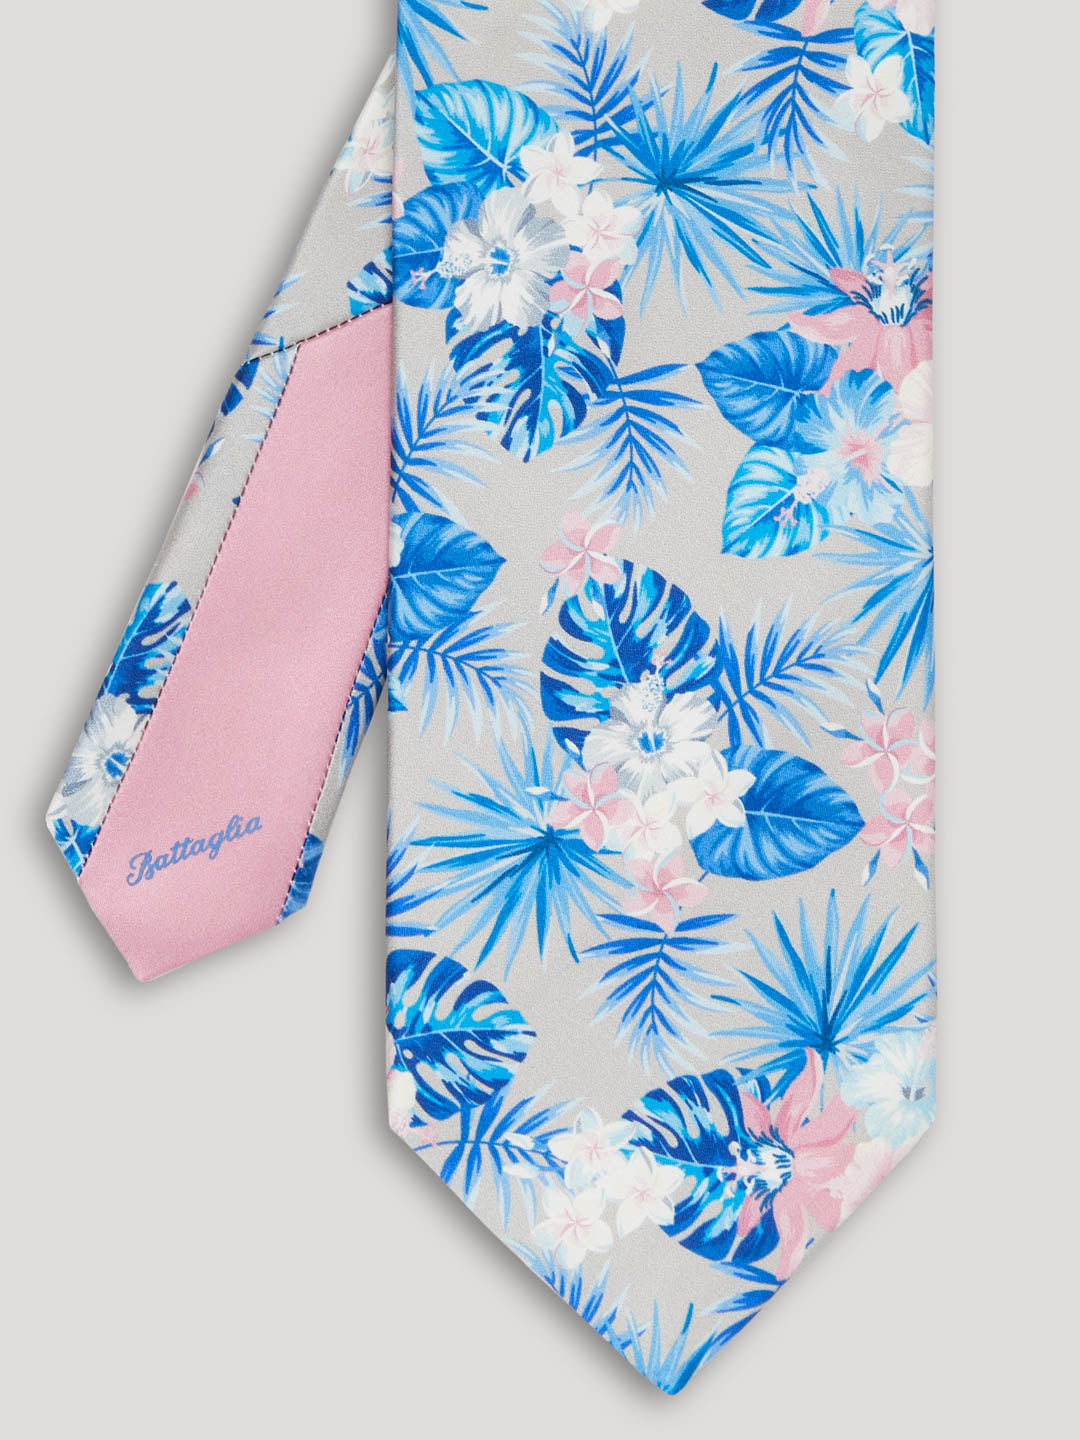 Silver, blue, and pink Hawaiian print floral tie. 